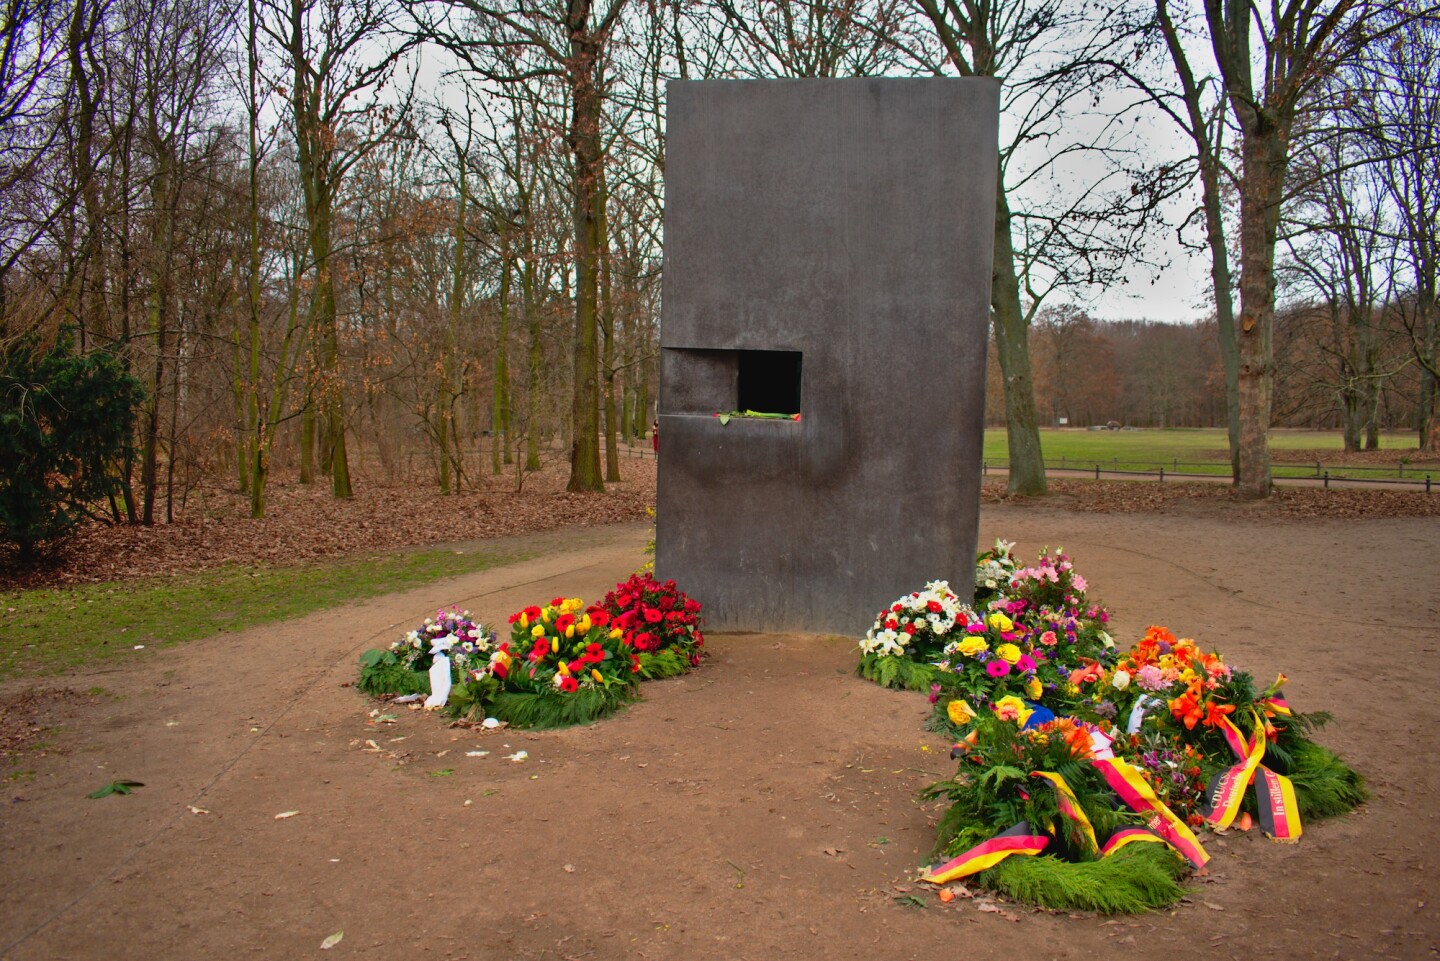 <h2><b>Memorial to Homosexuals Persecuted Under Nazism </b></h2> <h3>Berlin, Germany</h3> <p> <a class="Link" href="https://www.afar.com/travel-guides/germany/berlin/guide" rel="noopener">Berlin</a> is home to a <a class="Link" href="https://www.visitberlin.de/en/denkmal-fur-die-zur-ns-zeit-verfolgten-homosexuellen" rel="noopener">stark monument</a> that commemorates the thousands of LGBTQ lives lost to Nazism before and during World War II. Since 2008, the memorial has stood among other somber tributes in Tiergarten (the city’s central park), inviting visitors to peer through a window within a giant concrete cube to glimpse a video that showcases a same-sex kiss. In addition to this memorial—and Berlin’s impressive <a class="Link" href="https://www.visitberlin.de/en/schwules-museum-gay-museum" rel="noopener">Shwules </a><a class="Link" href="https://www.visitberlin.de/en/schwules-museum-gay-museum" rel="noopener">(Gay) Museum</a>—travelers can visit other monuments that commemorate victims of LGBTQ persecution across Germany. In Cologne, Frankfurt, and Nuremberg—all cities that celebrate Pride annually—similar memorials honor tragedies of the past and remind us that the fight for human equality continues.</p> <p><i>This story was originally published in 2019; it was most recently updated with new information on June 3, 2024.</i></p>